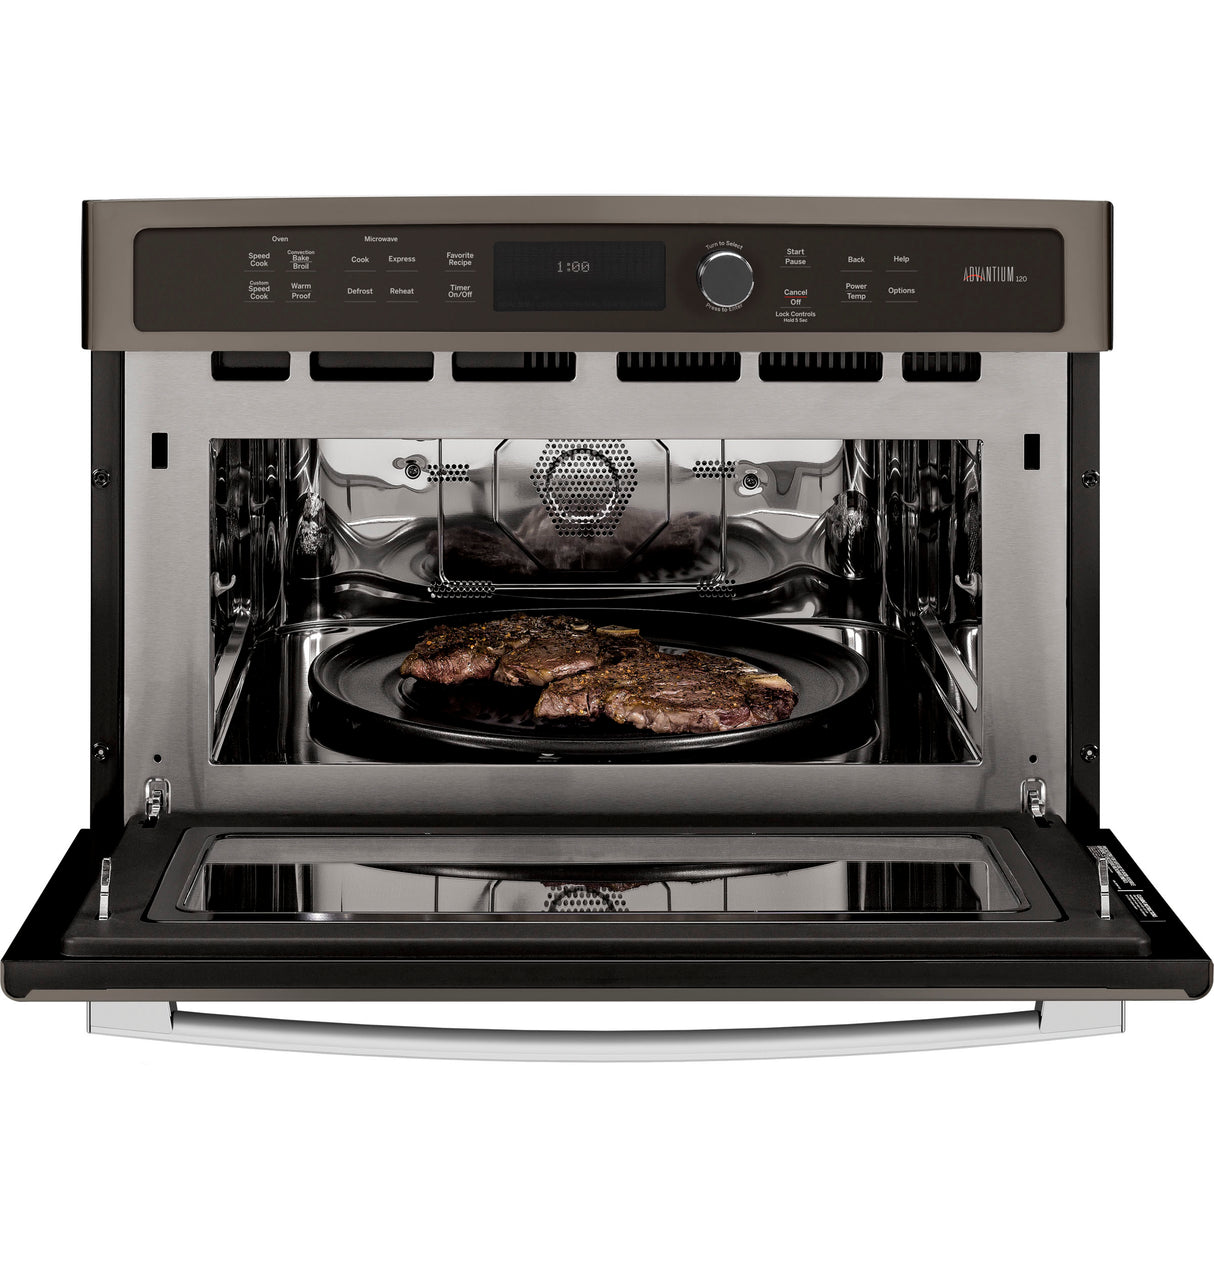 GE Profile(TM) 27 in. Single Wall Oven Advantium(R) Technology - (PSB9100EFES)